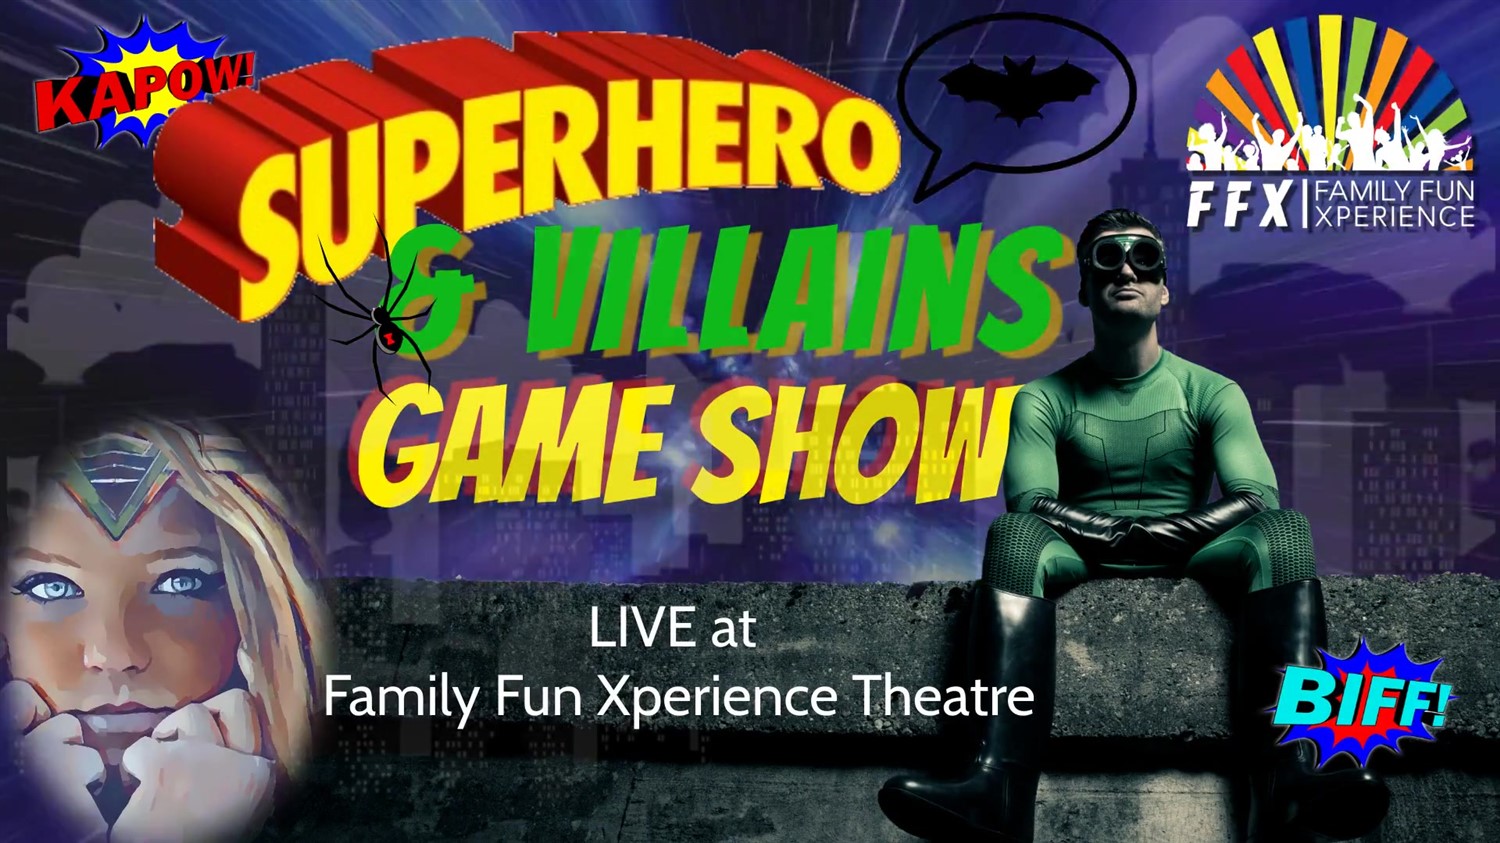 Superheroes & Villains: LIVE GAME SHOW!  on May 31, 19:00@FFX Theatre - Buy tickets and Get information on Family Fun Xperience tickets.ffxshow.org